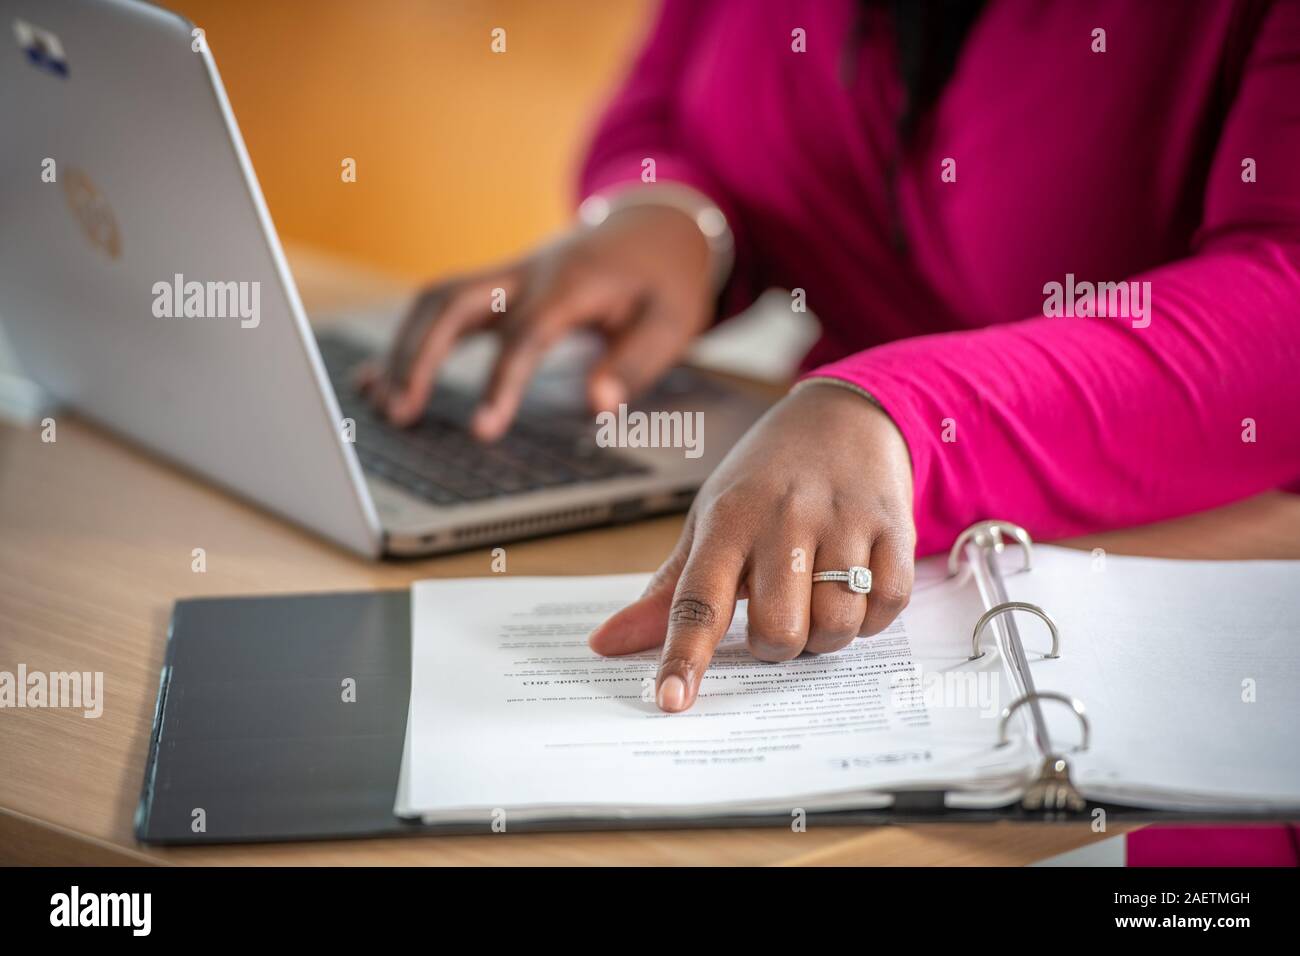 A worker checks some paperwork while they're on the computer Stock Photo